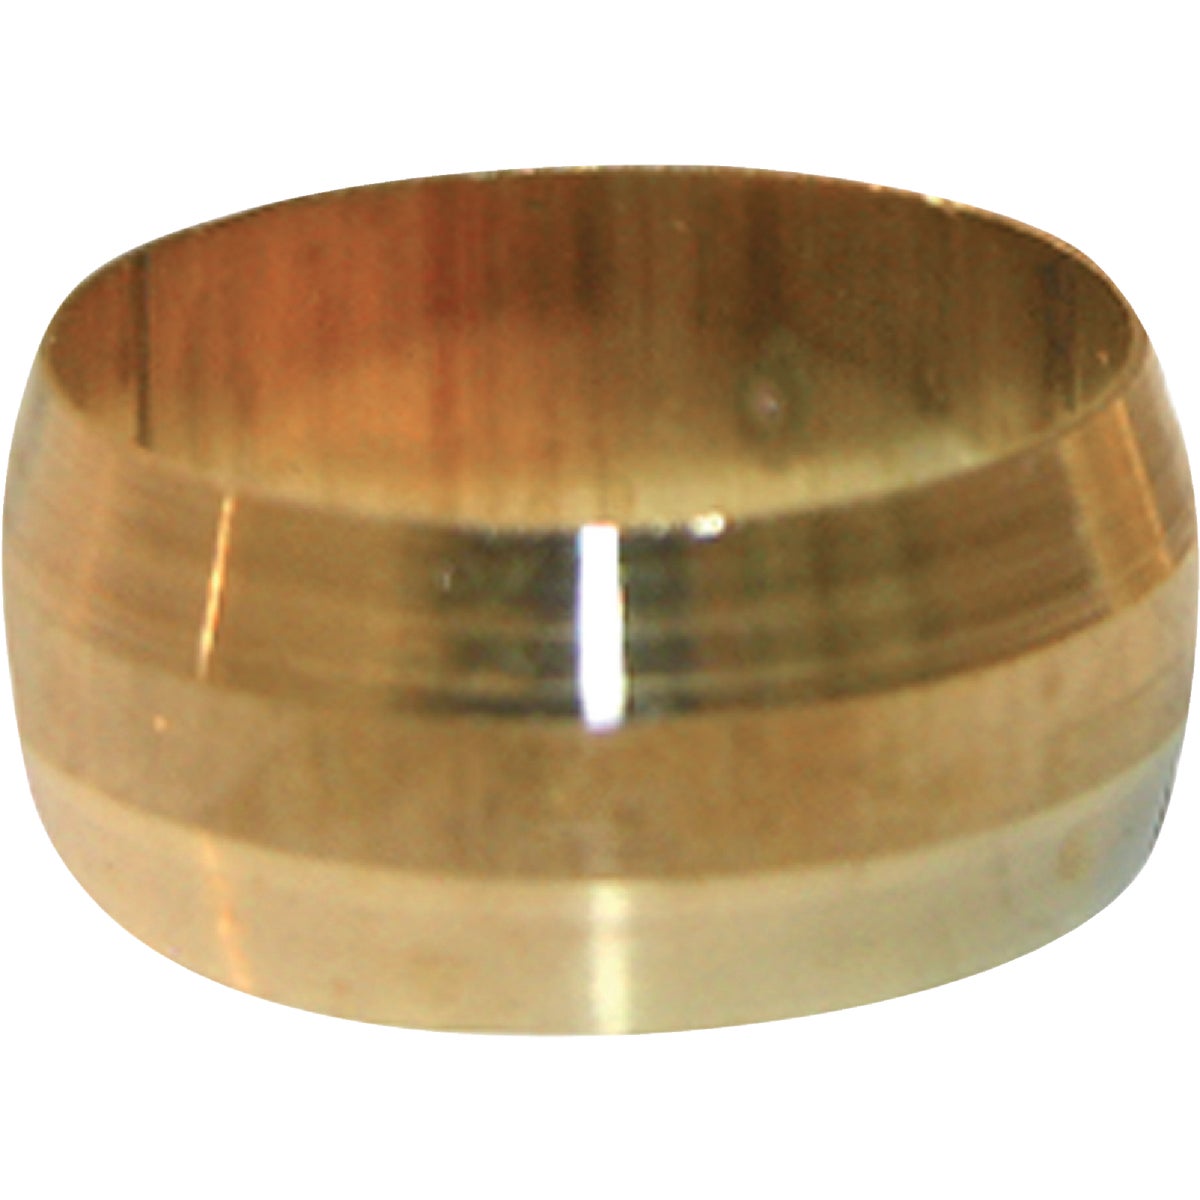 Lasco 3/8 In. Brass Compression Sleeve (2-Pack)